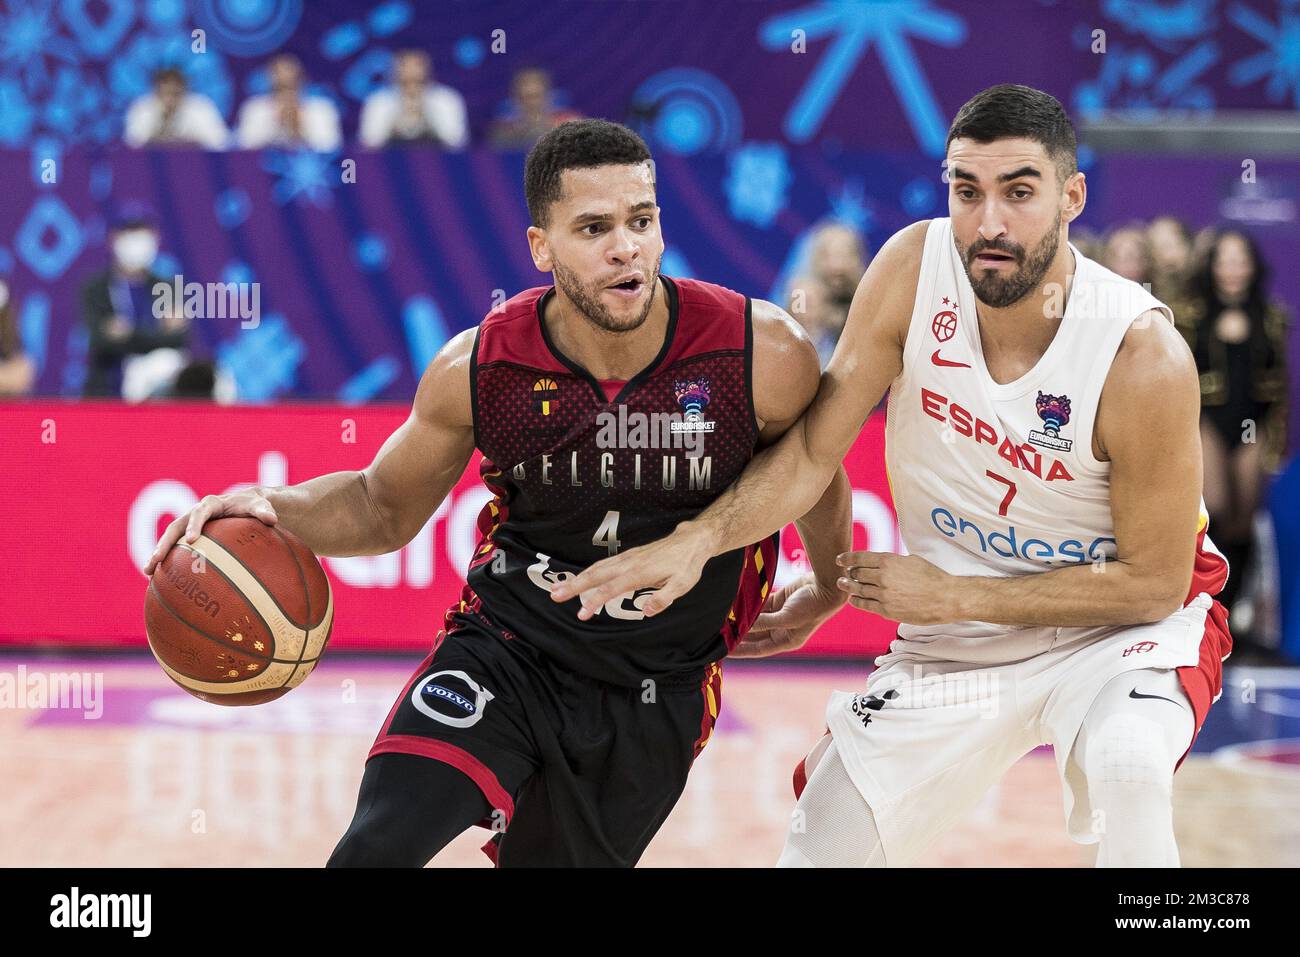 Emmanuel Lecomte of Belgium, Jaime Fernandez of Spain pictured during the  match between Spain and the Belgian Lions, game three of five in group A at  the EuroBasket 2022, Sunday 04 September